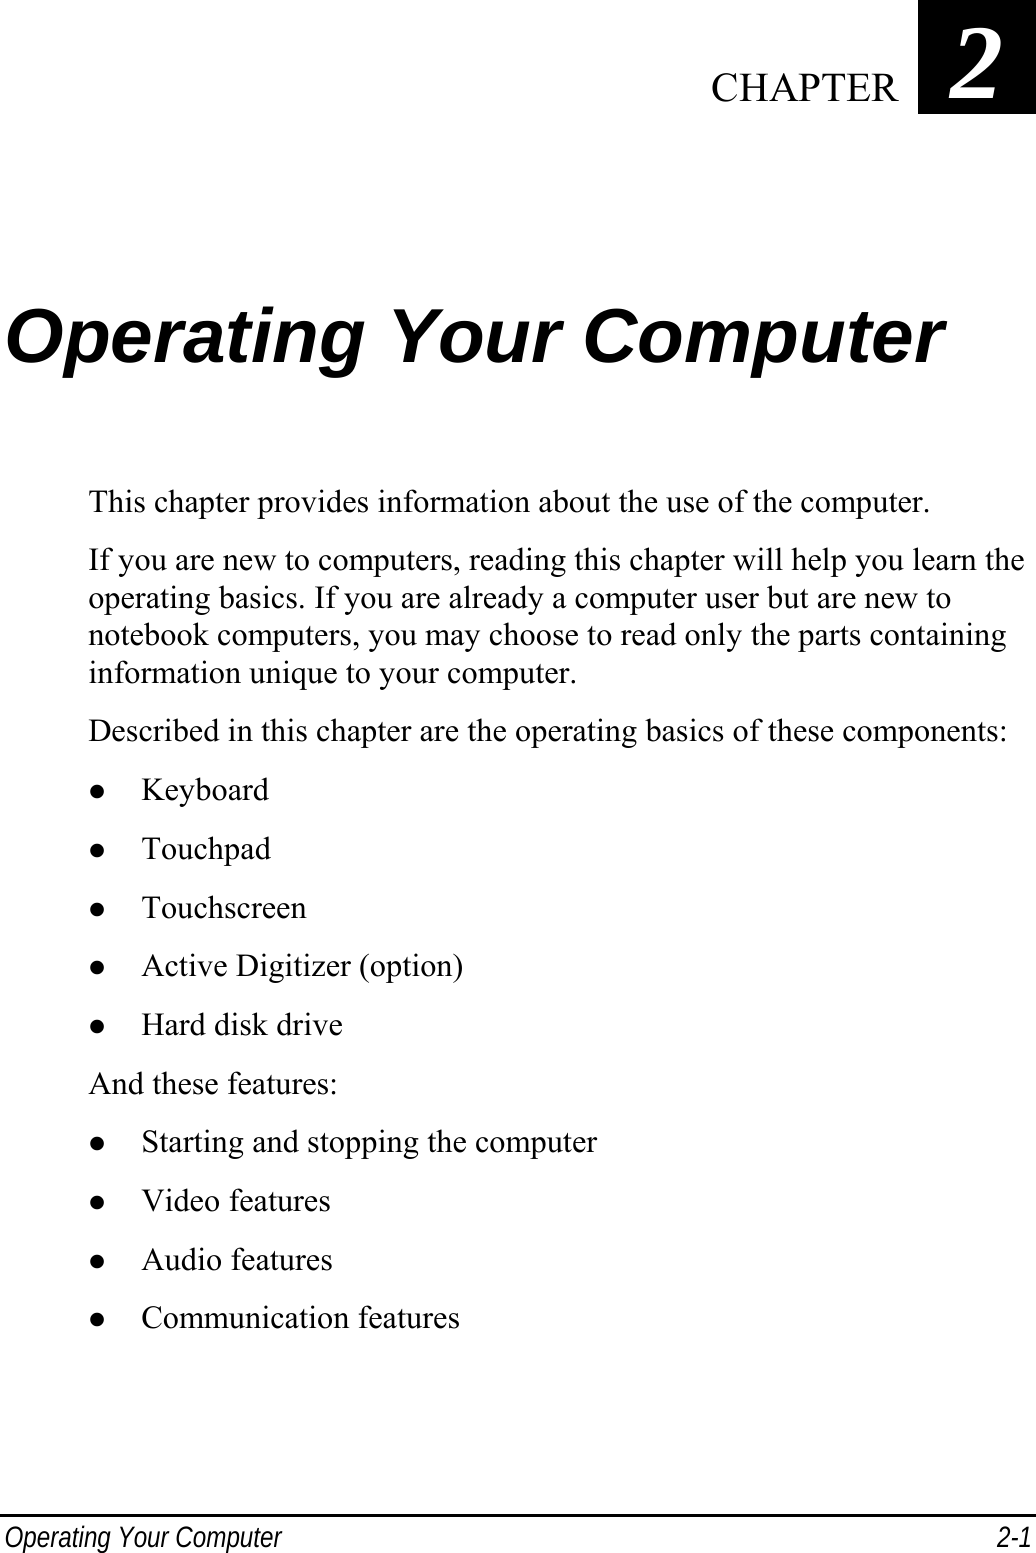  Operating Your Computer  2-1 Chapter   2 Operating Your Computer This chapter provides information about the use of the computer. If you are new to computers, reading this chapter will help you learn the operating basics. If you are already a computer user but are new to notebook computers, you may choose to read only the parts containing information unique to your computer. Described in this chapter are the operating basics of these components: z Keyboard z Touchpad z Touchscreen z Active Digitizer (option) z Hard disk drive And these features: z Starting and stopping the computer z Video features z Audio features z Communication features  CHAPTER 